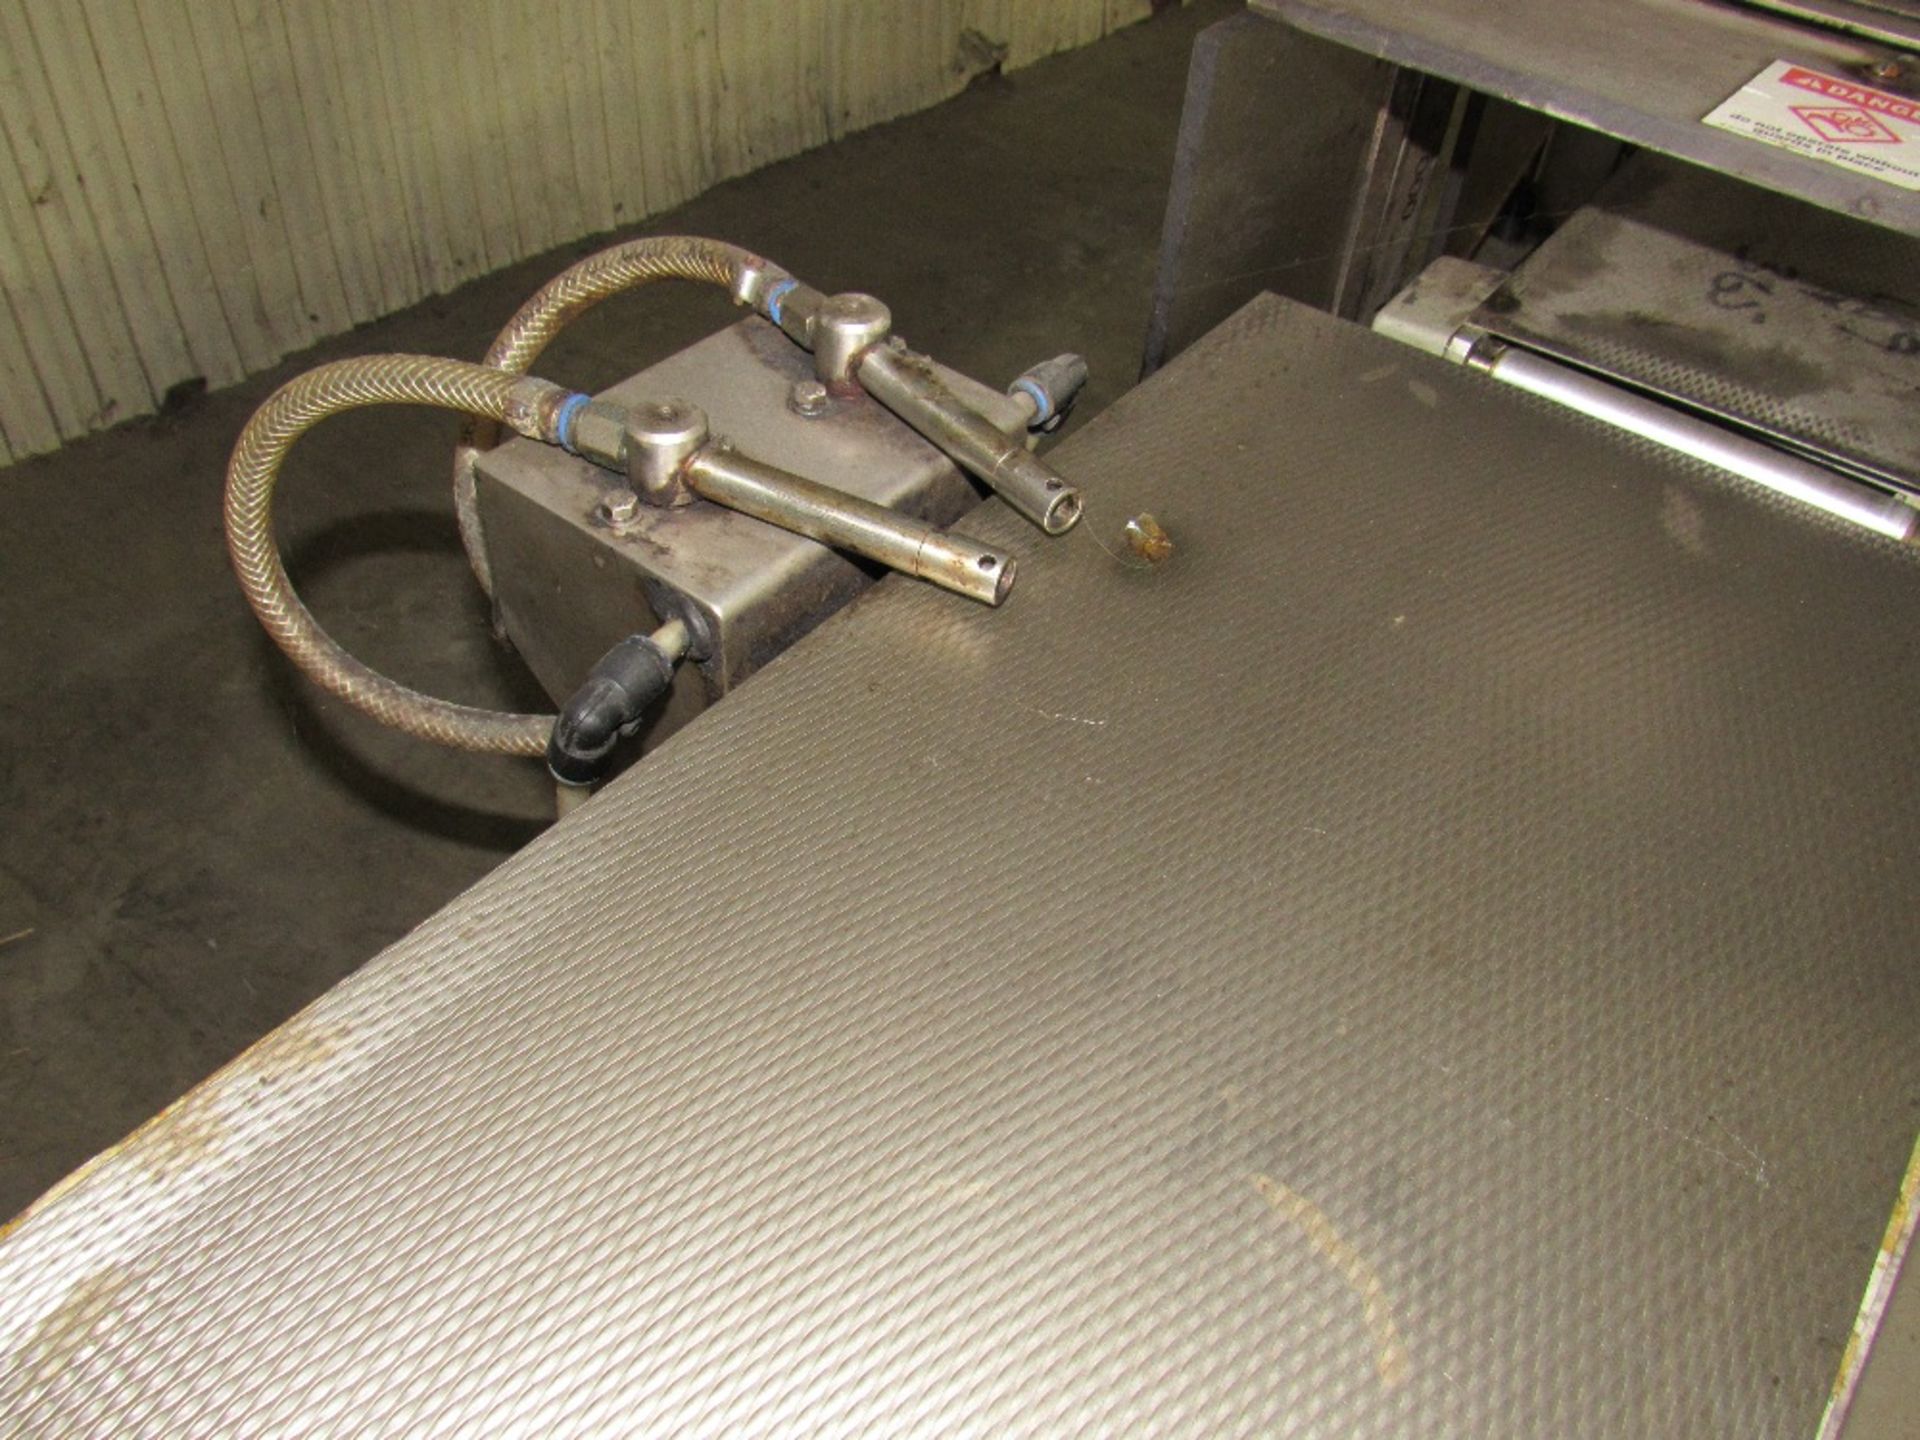 Loma 7000 Staginess Steel Check weigher with built-in 7.5 gallon air tanks and product conveyor - Image 8 of 21